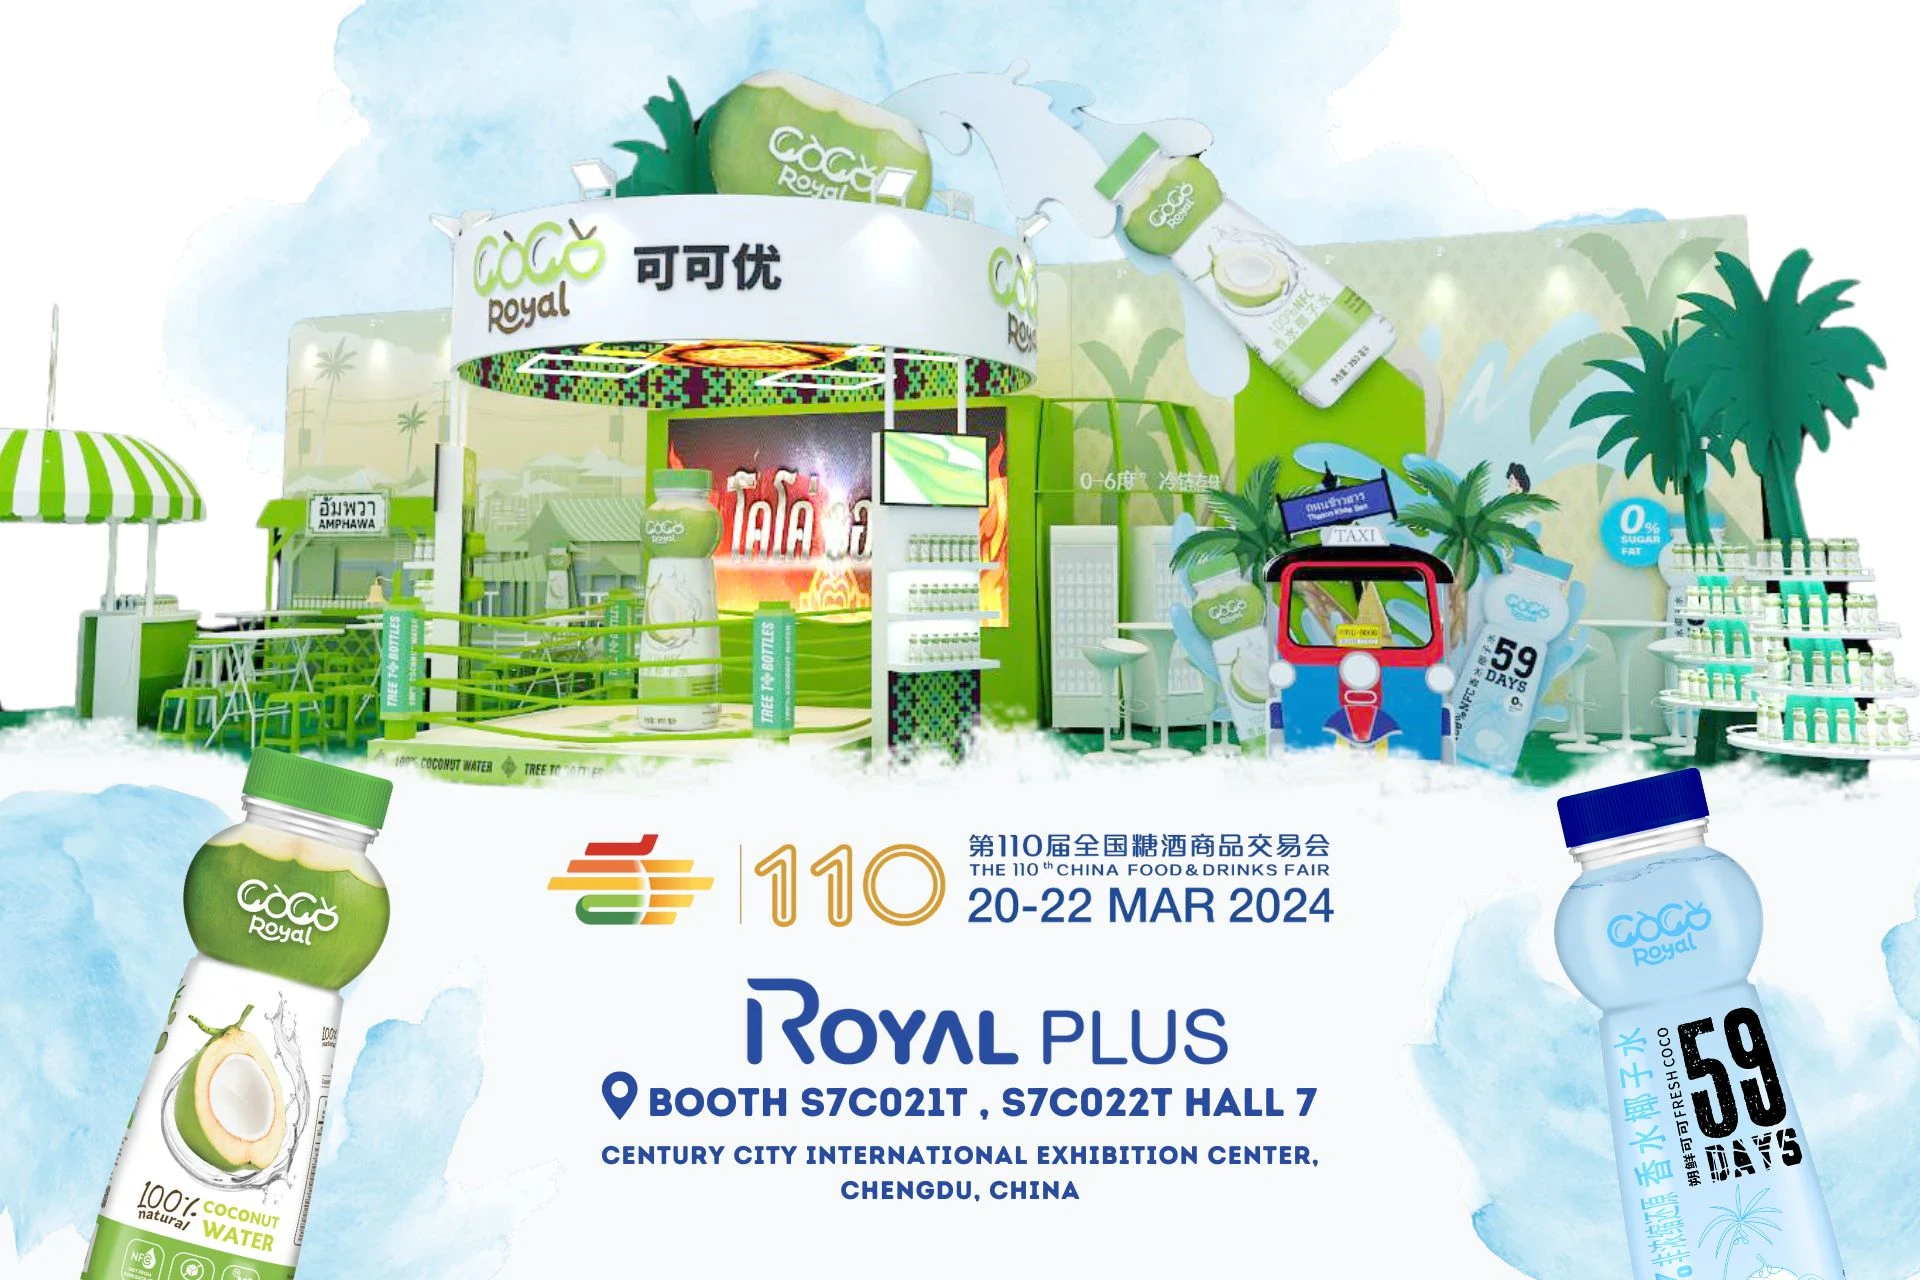 Royal Plus is teaming up with its strong partner to introduce our COCO ROYAL brand's 100% coconut water, to penetrate the Chinese market at the 110th China Food & Drink Fair in Chengdu, China